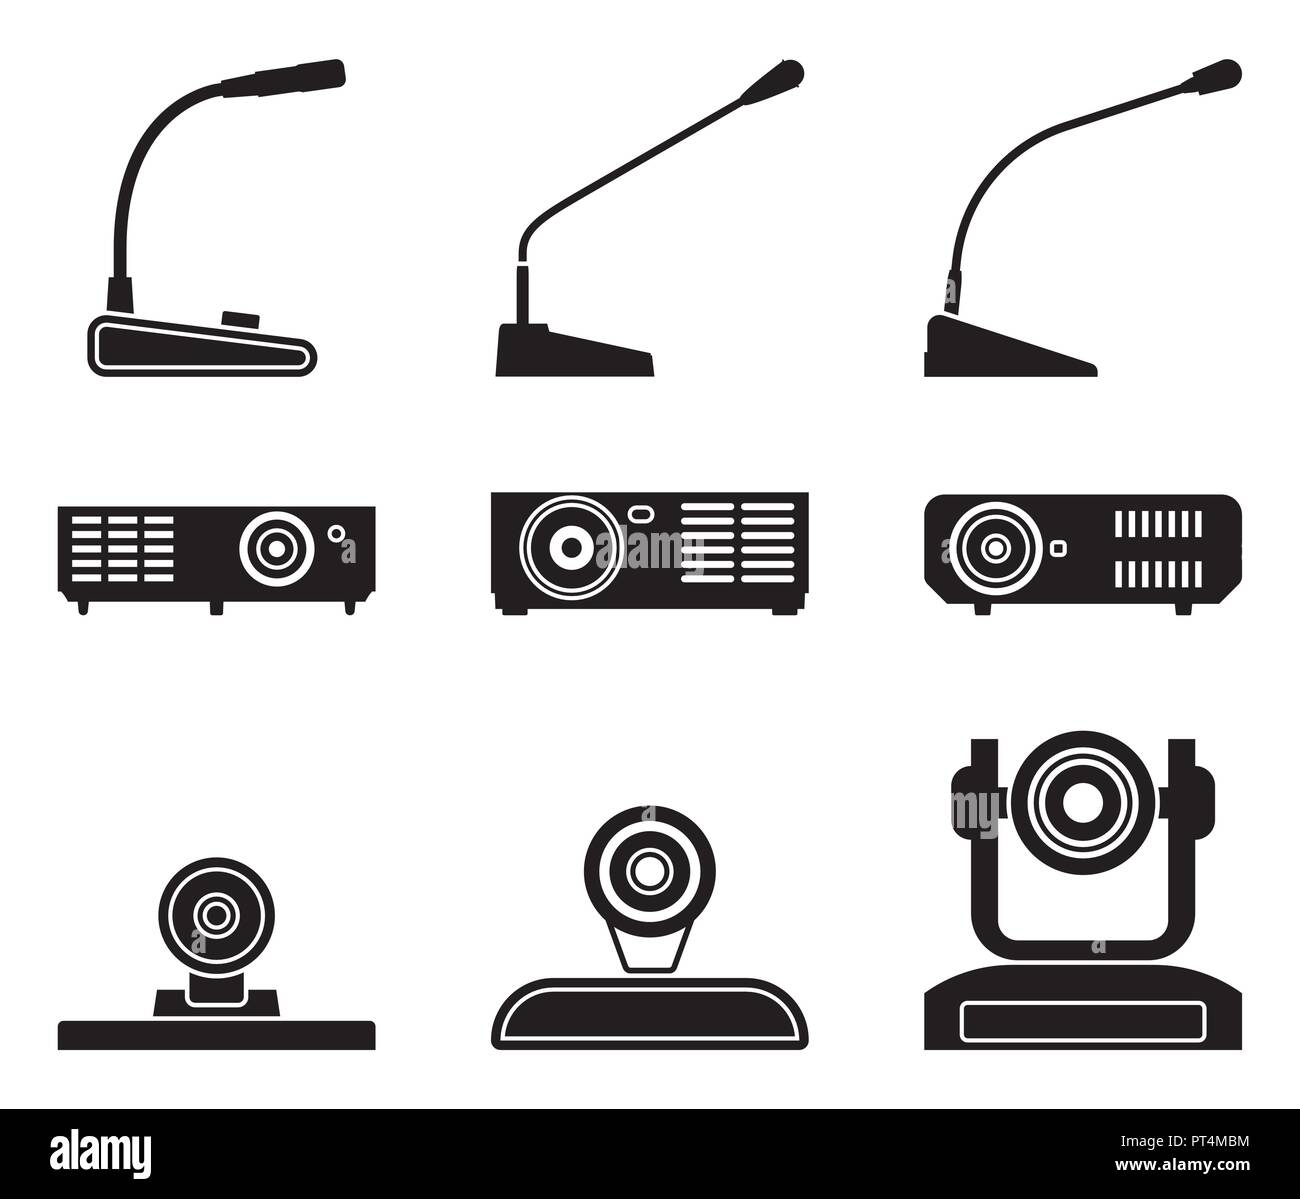 Conference equipment icon set. Silhouette vector Stock Vector